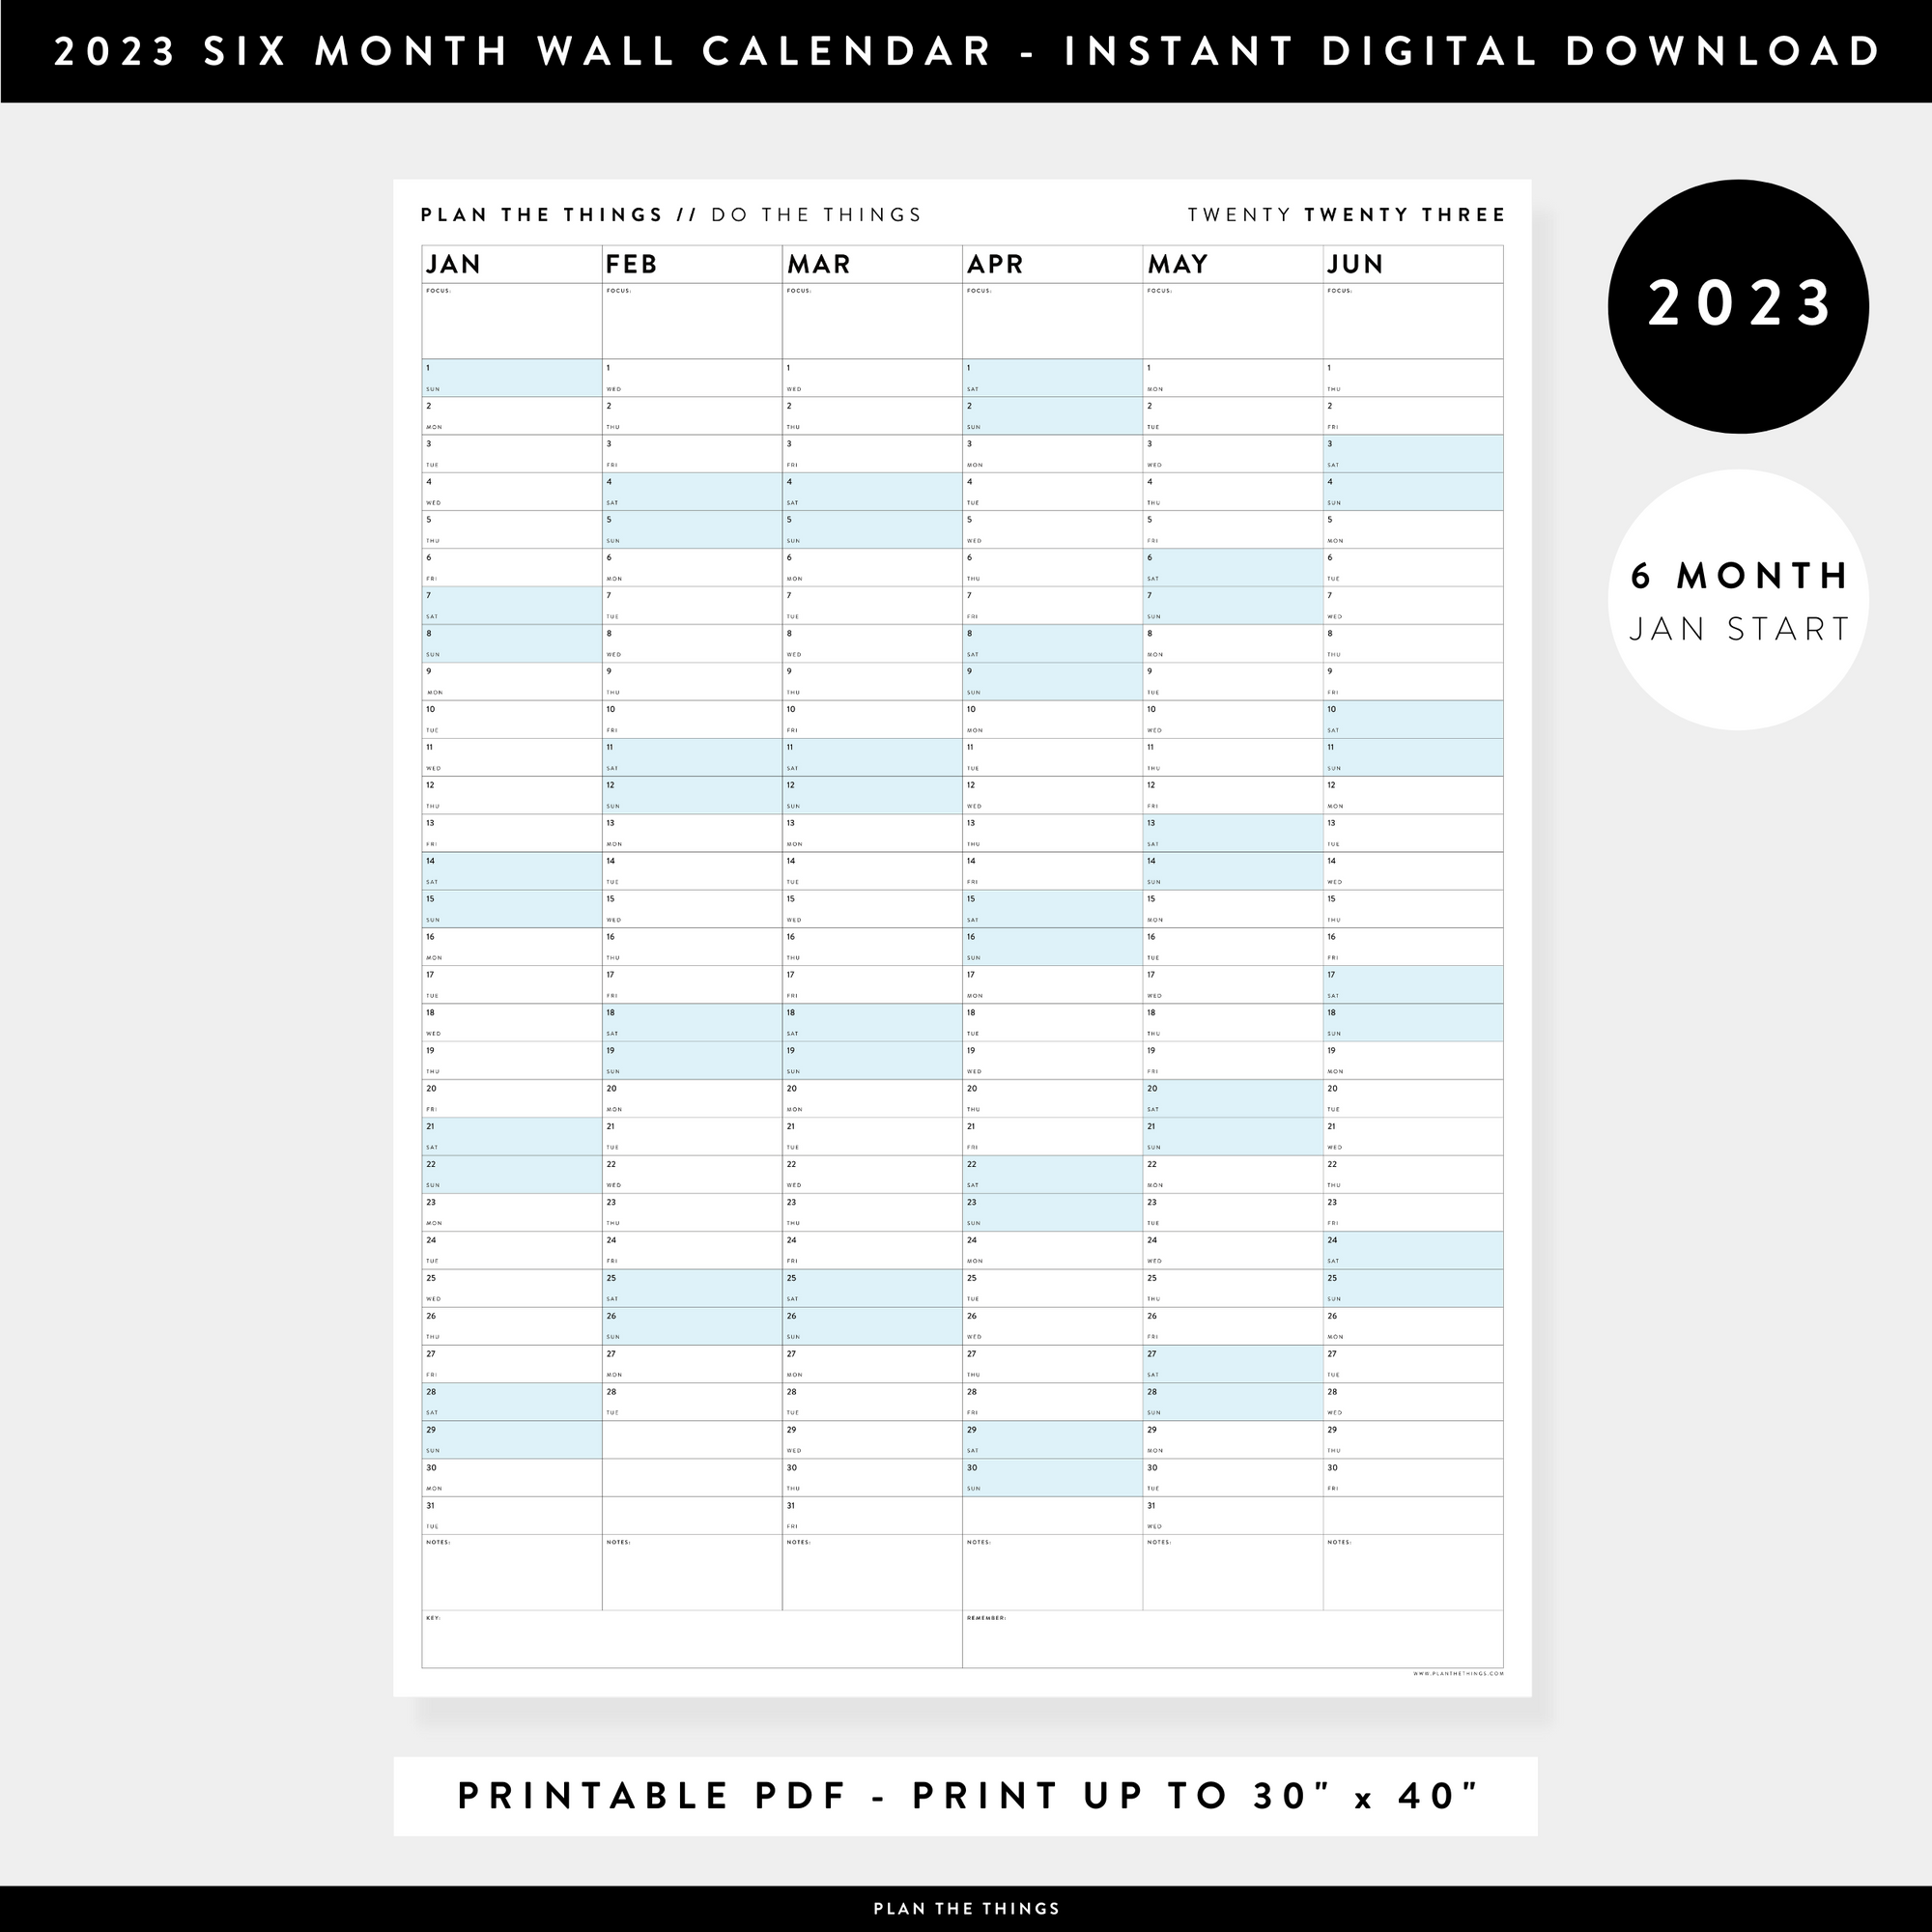 PRINTABLE SIX MONTH 2023 WALL CALENDAR (JANUARY TO JUNE) WITH BLUE WEEKENDS - INSTANT DOWNLOAD